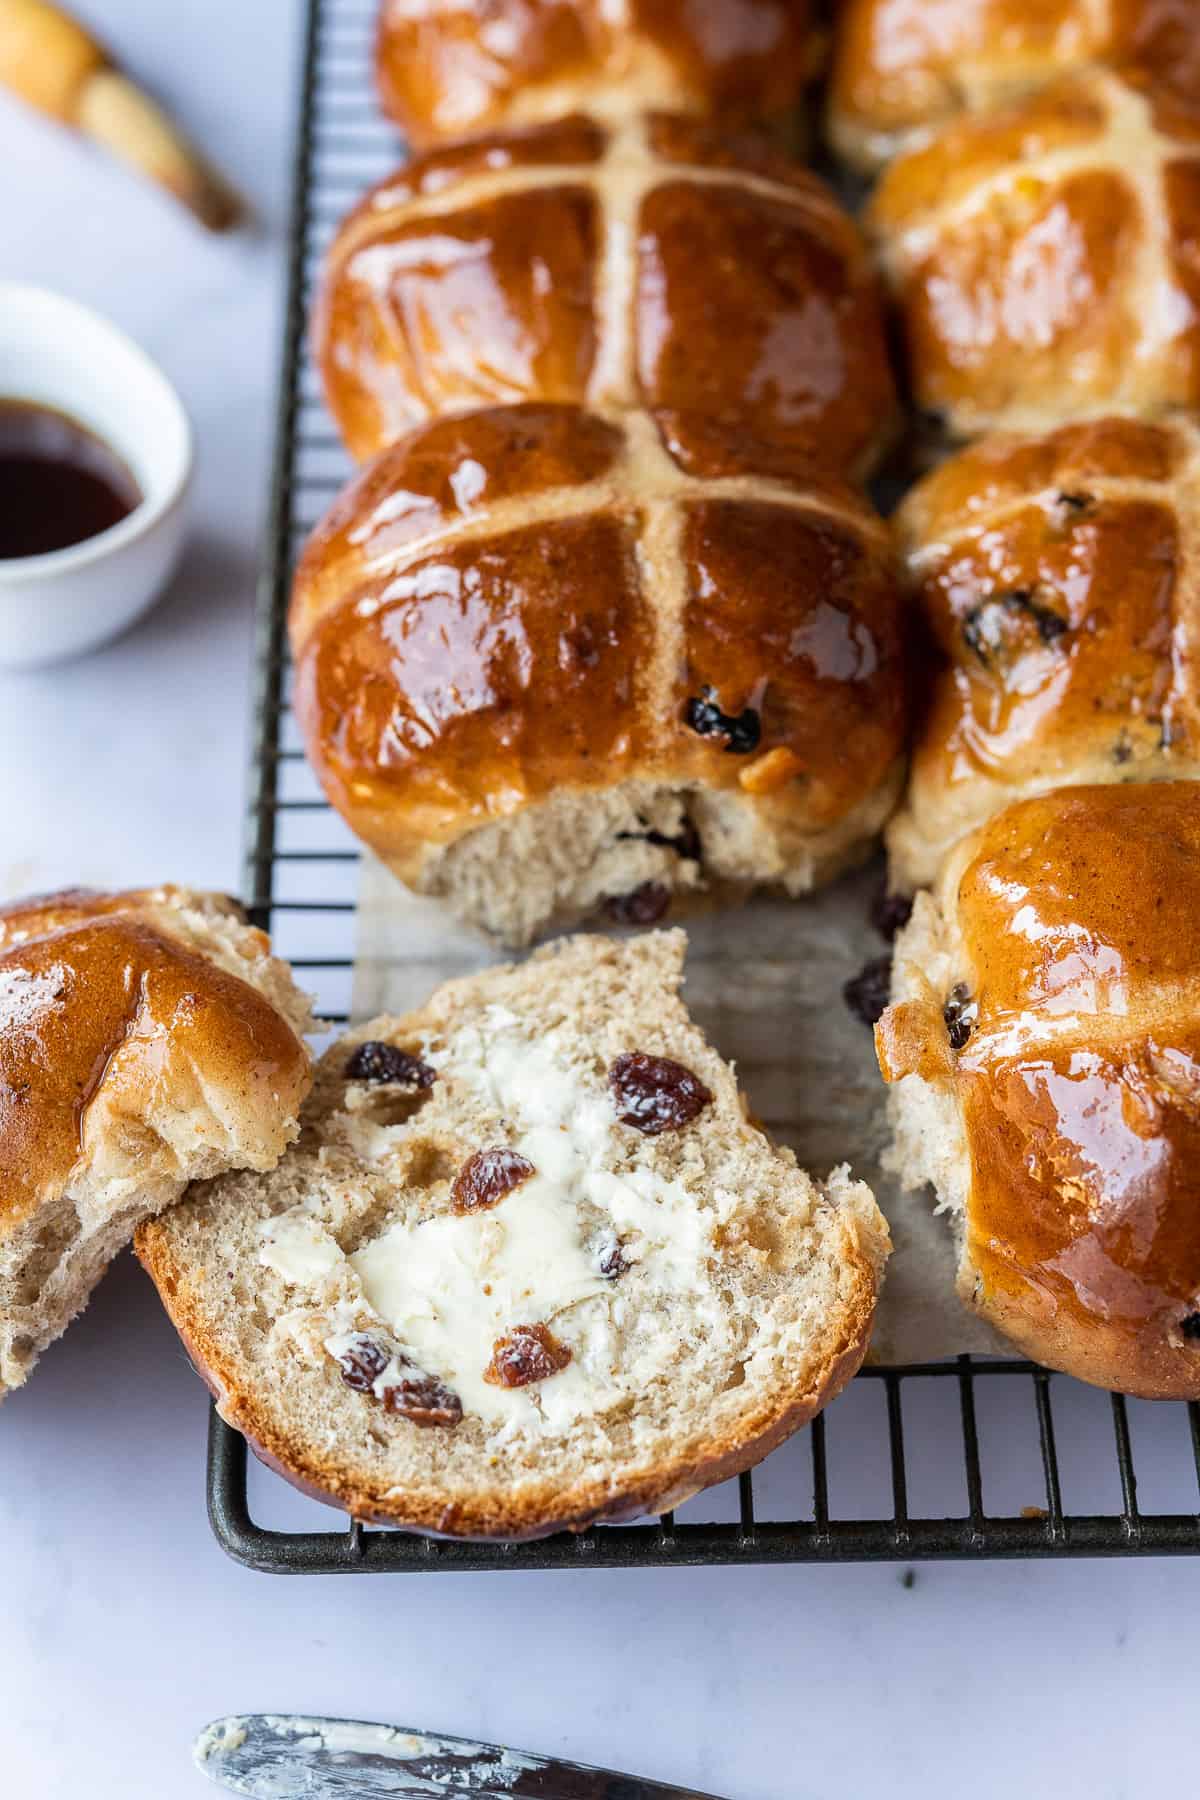 A hot cross bun sliced in half and spread with butter.